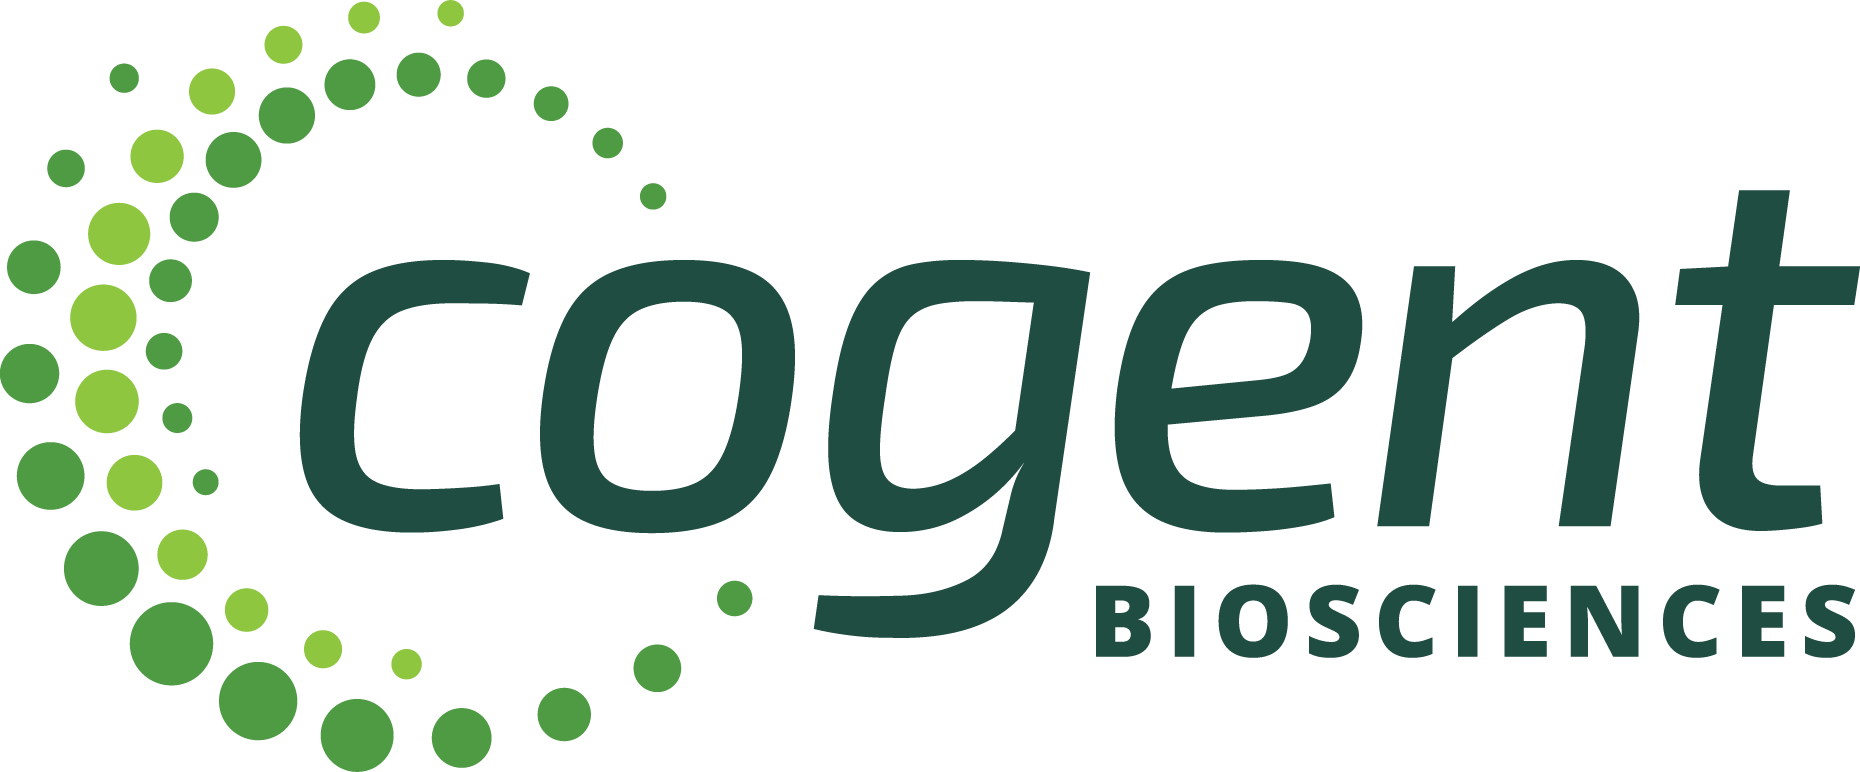 Cogent Biosciences Announces Positive Lead-In Data from Ongoing Phase 3 PEAK Trial Evaluating Bezuclastinib in Combination with Sunitinib in Patients with Gastrointestinal Stromal Tumors (GIST)